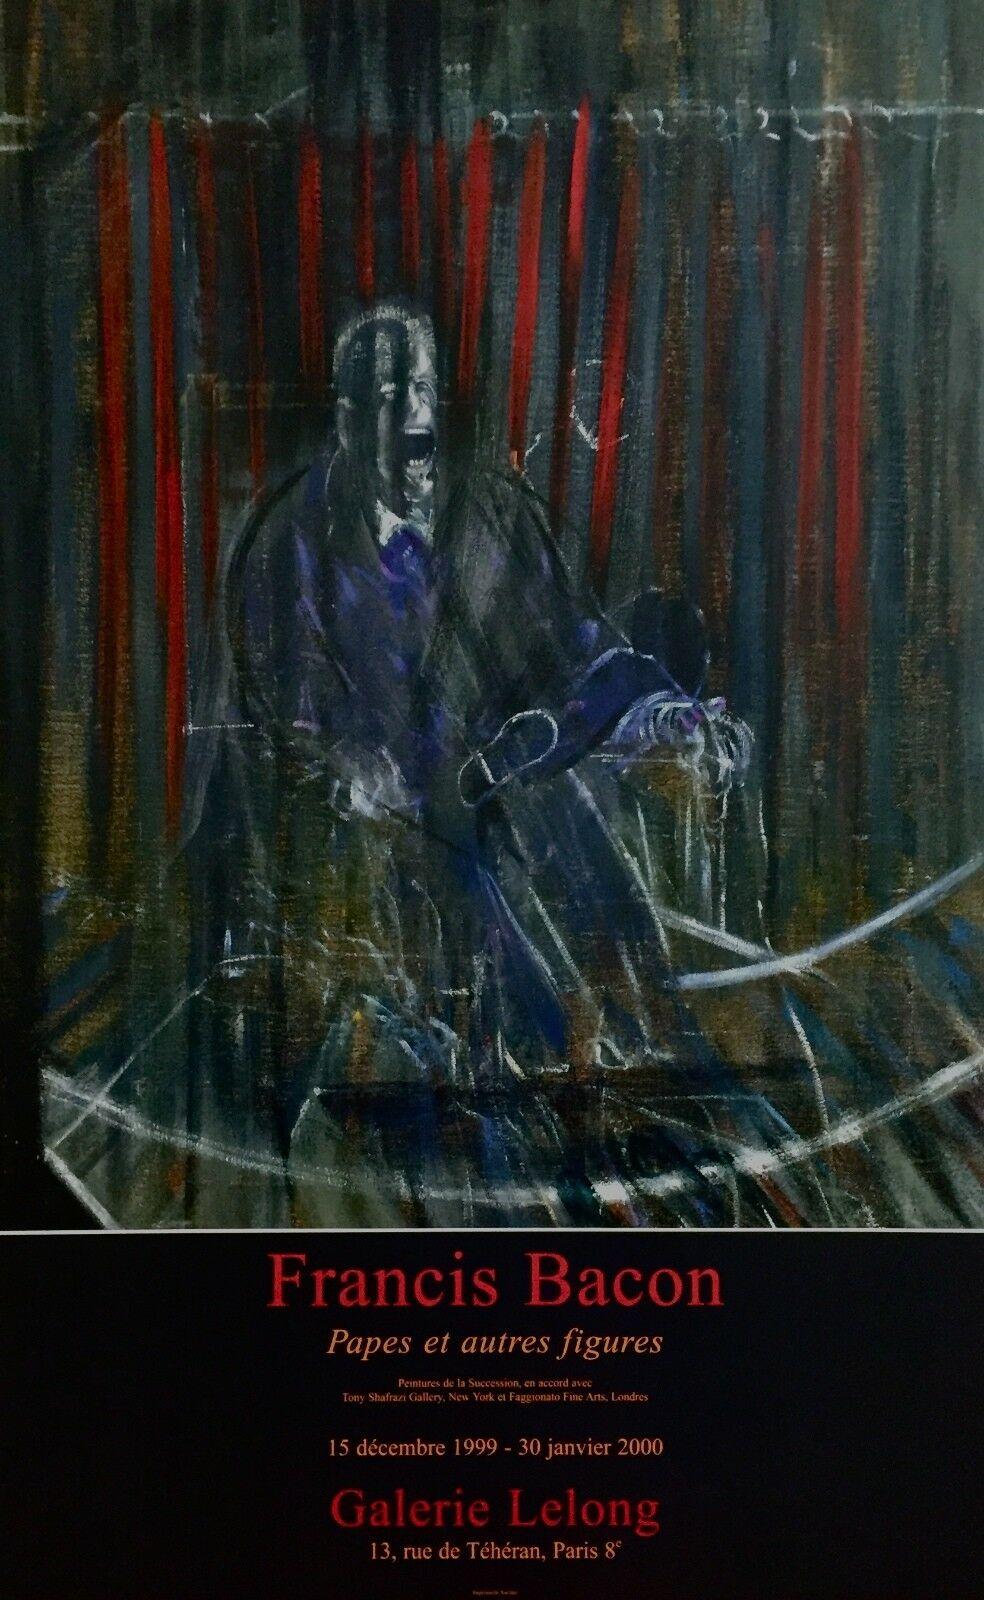 (after) Francis Bacon Figurative Print - Pope Innocent X 1999 Galerie Lelong Exhibition Poster